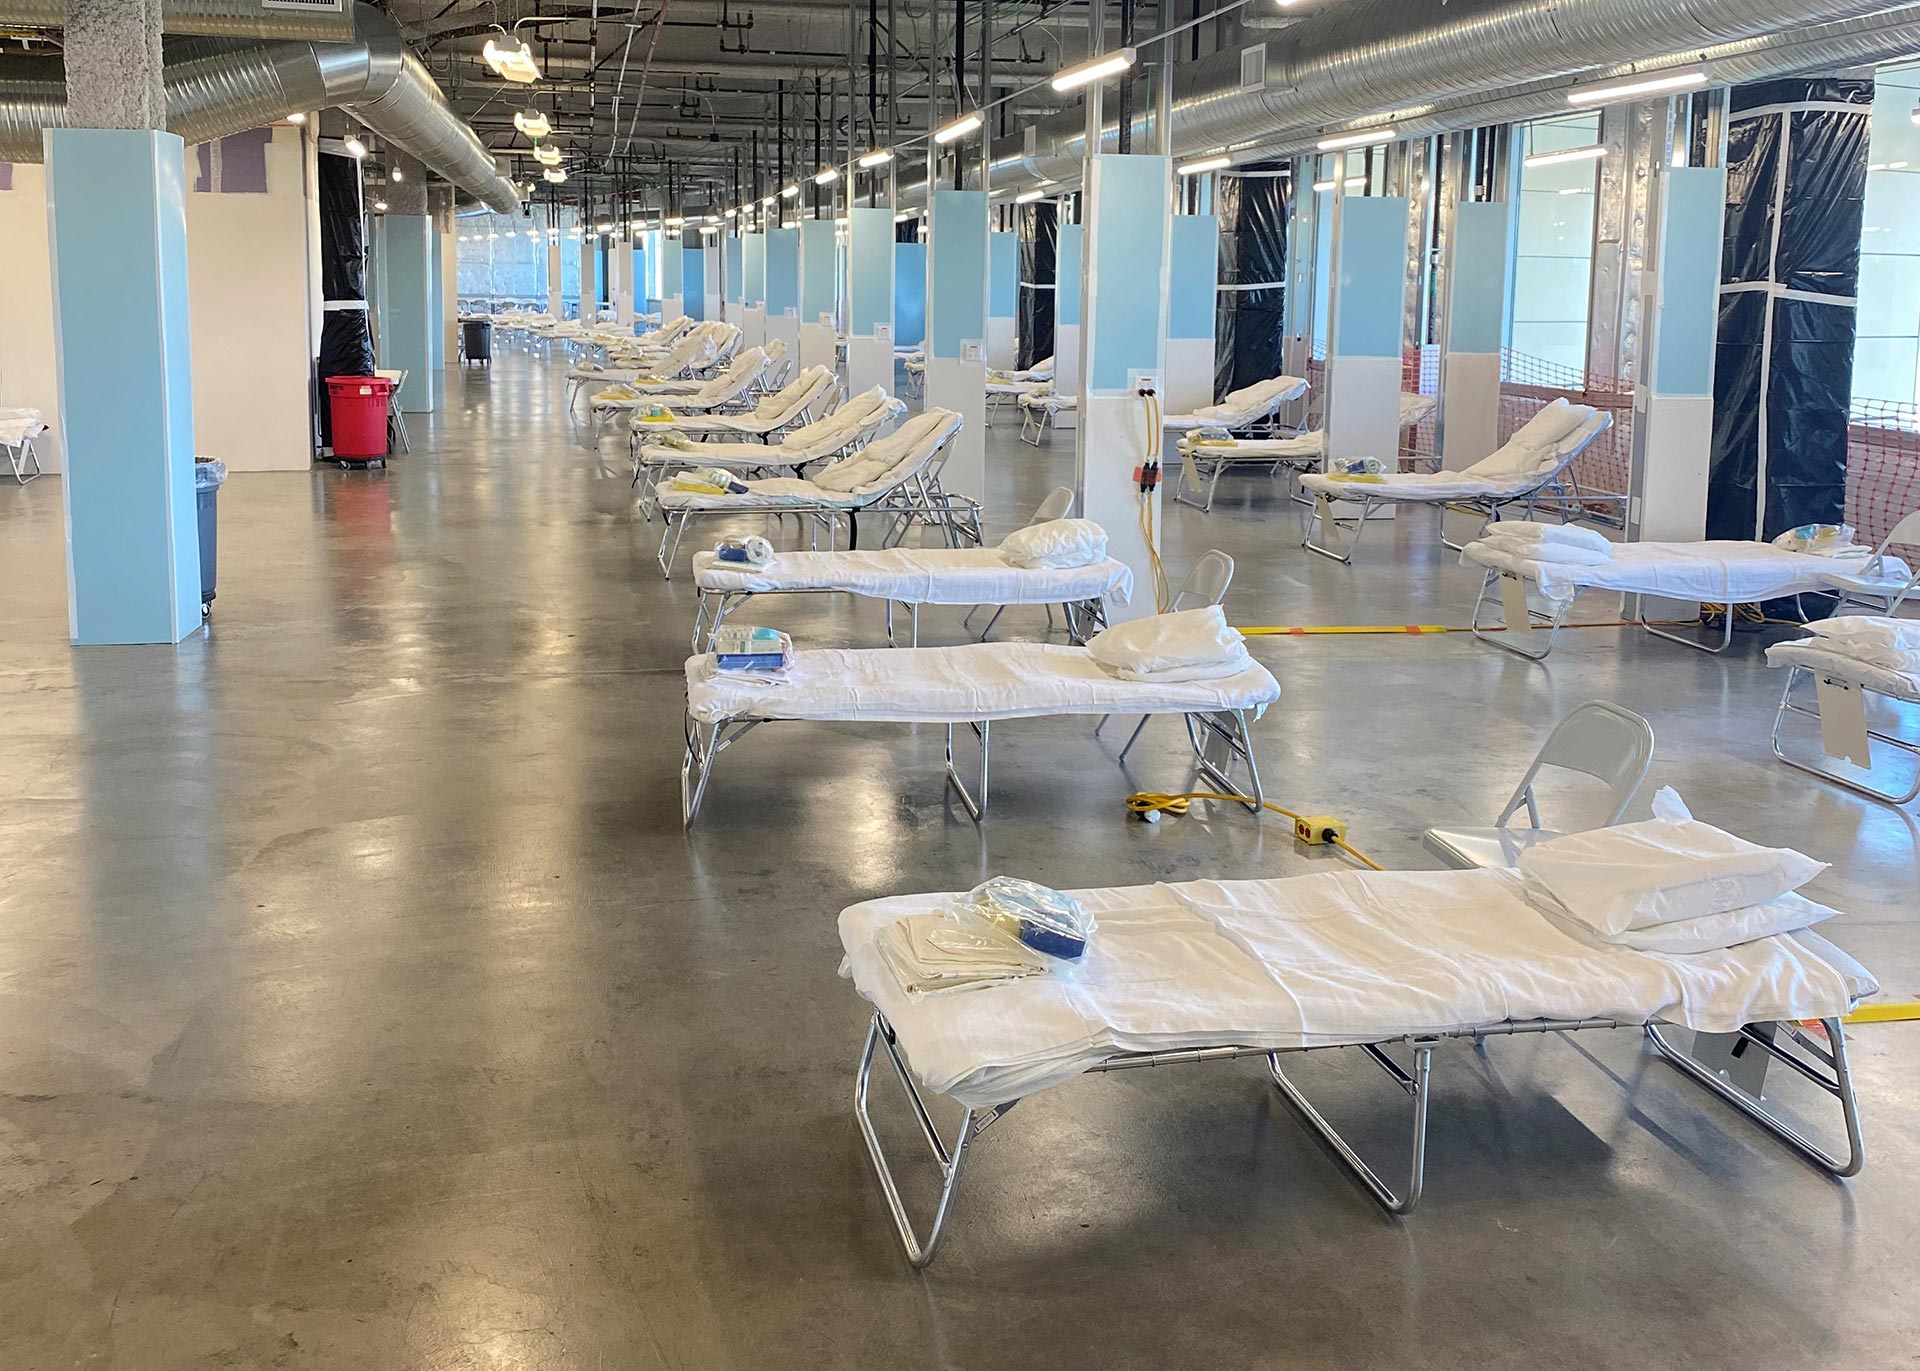 Herman Construction Group Adds 450 Beds to Emergency Field Hospitals in California